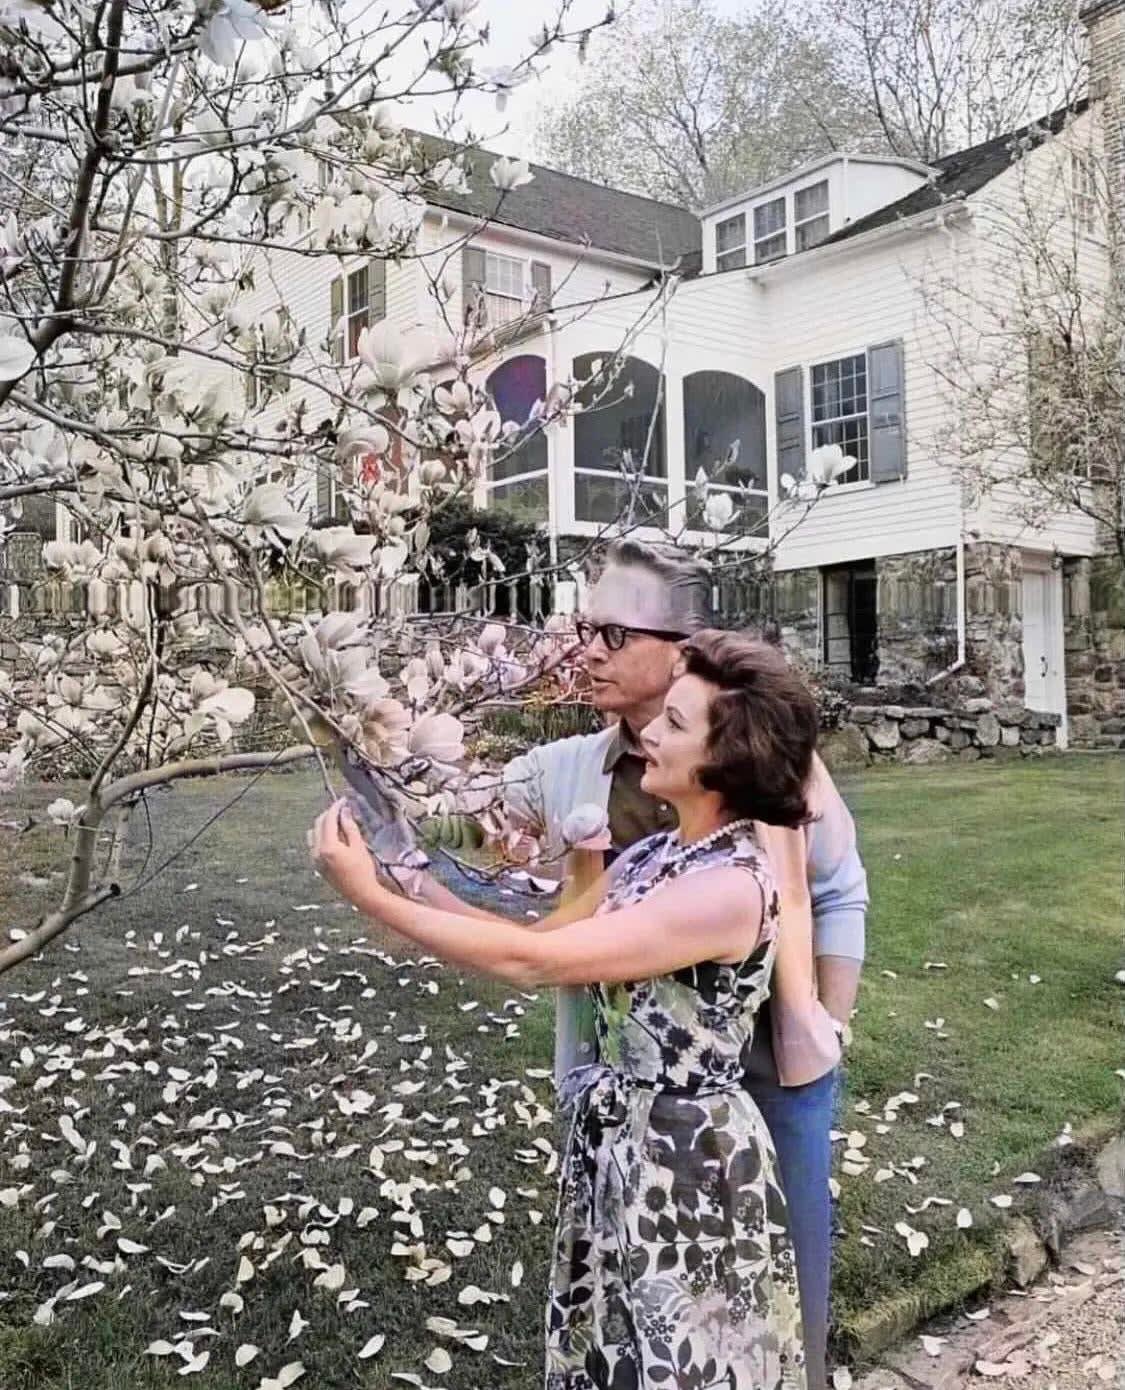 Betty White and her husband, Allen Ludden, admiring magnolia blossoms at their country home in Westchester NY, 1965